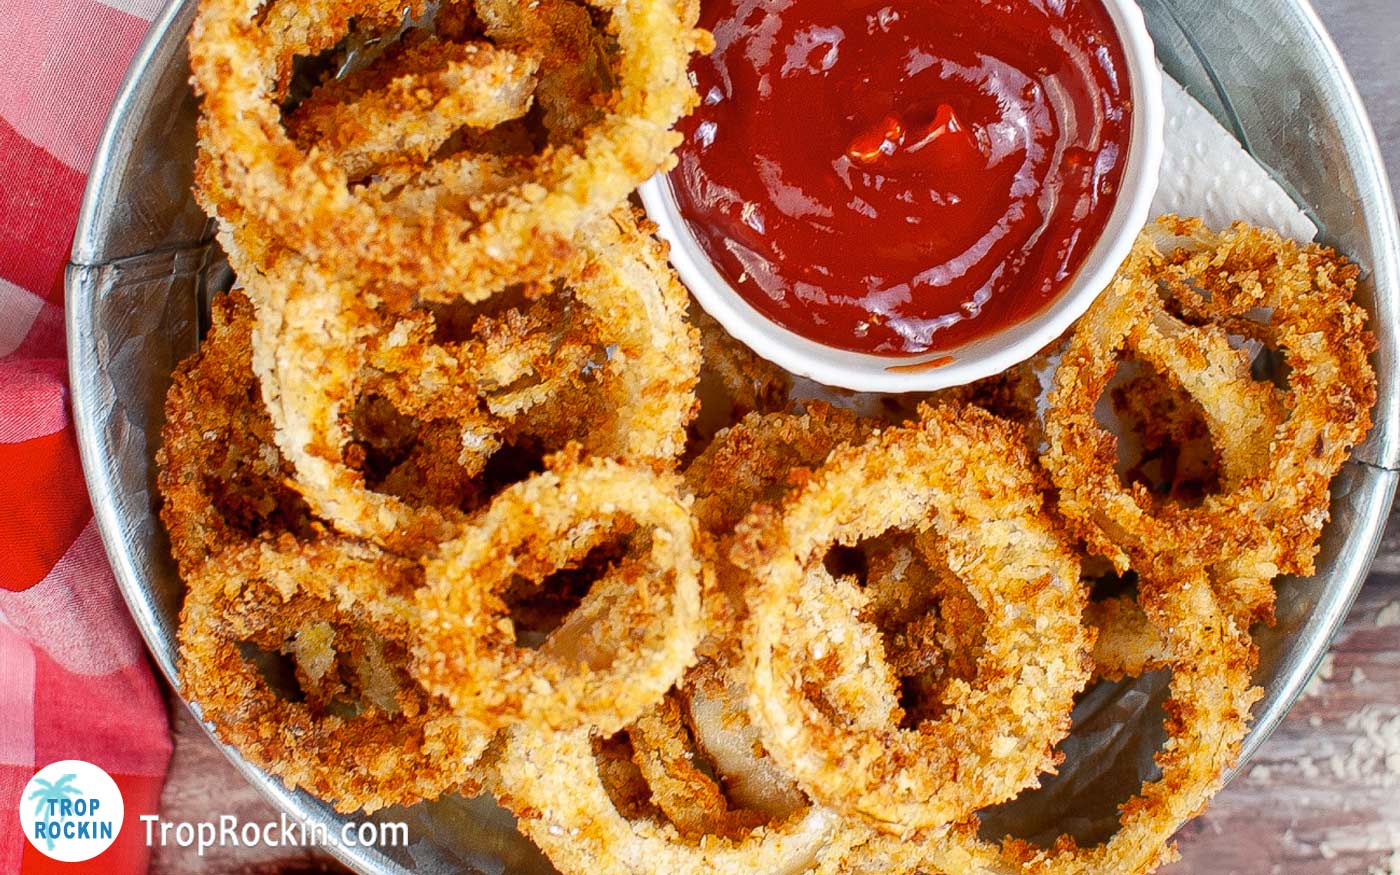 Tray full of air fryer onion rings and a small bowl of ketchup.